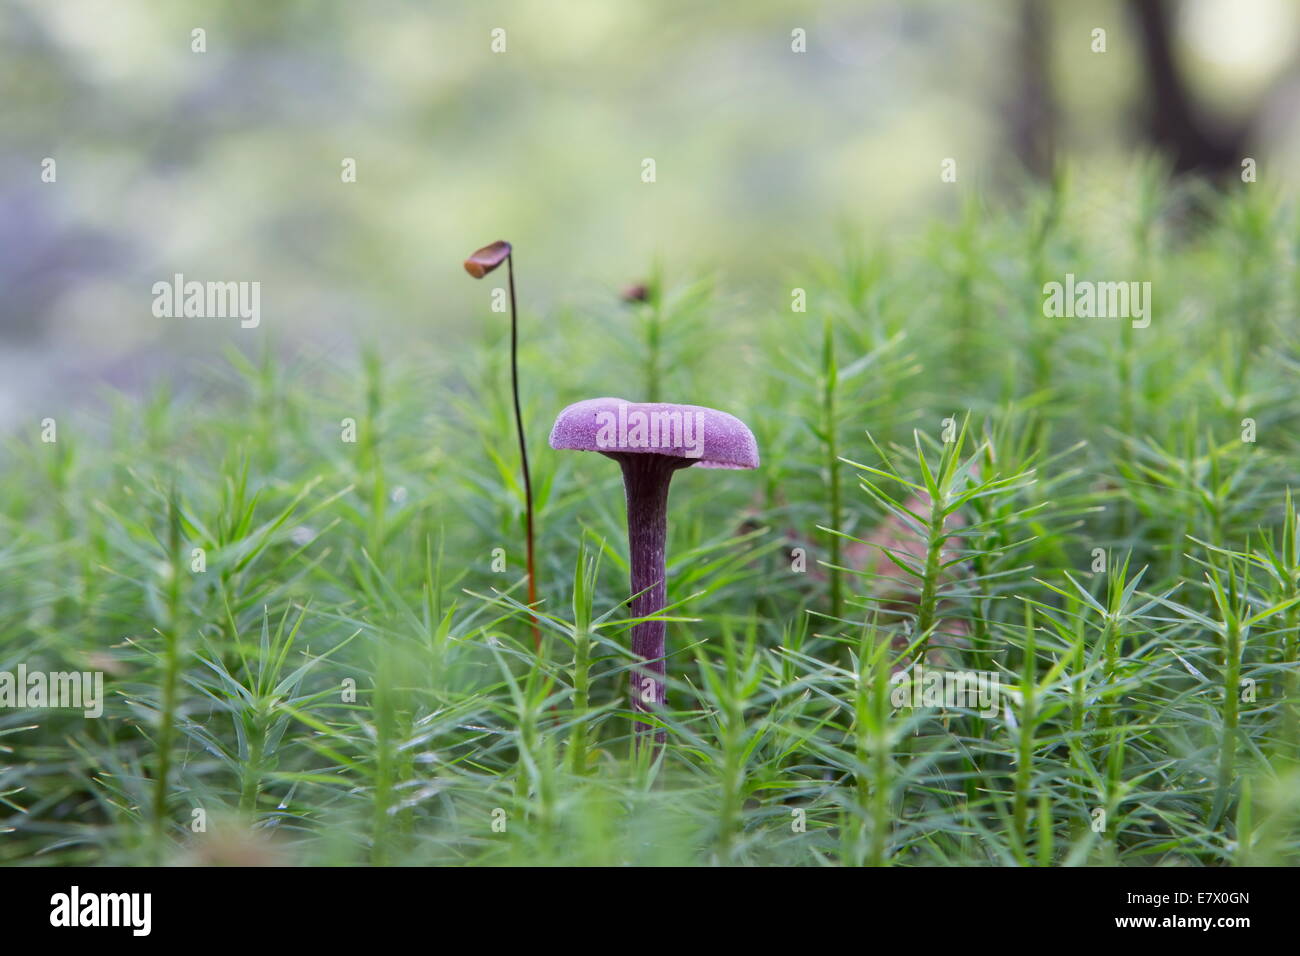 red cabbage mushroom grows between gaffeltandmos in the autumn forest, Netherlands Stock Photo